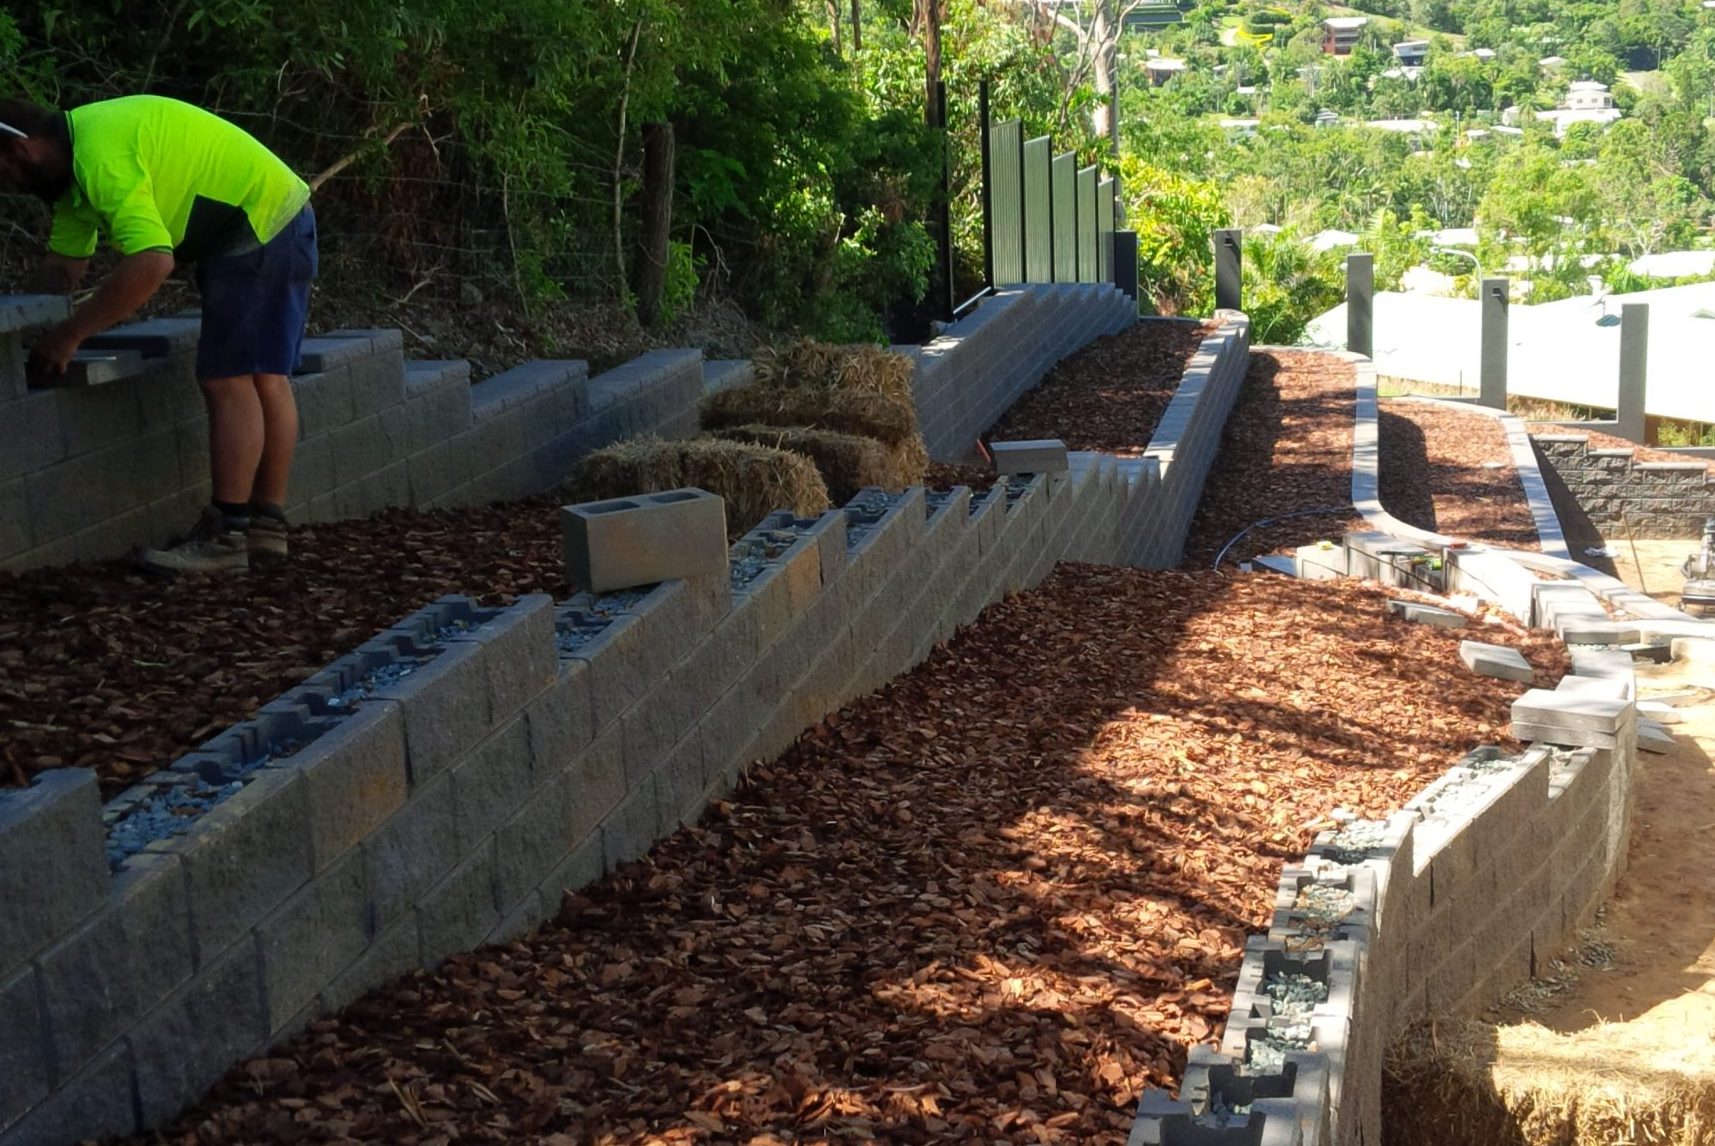 Professional_landscapers_creating_large_retaining_walls_with_green_location_pins_to_keep_the_walls_in_stretcher_bond